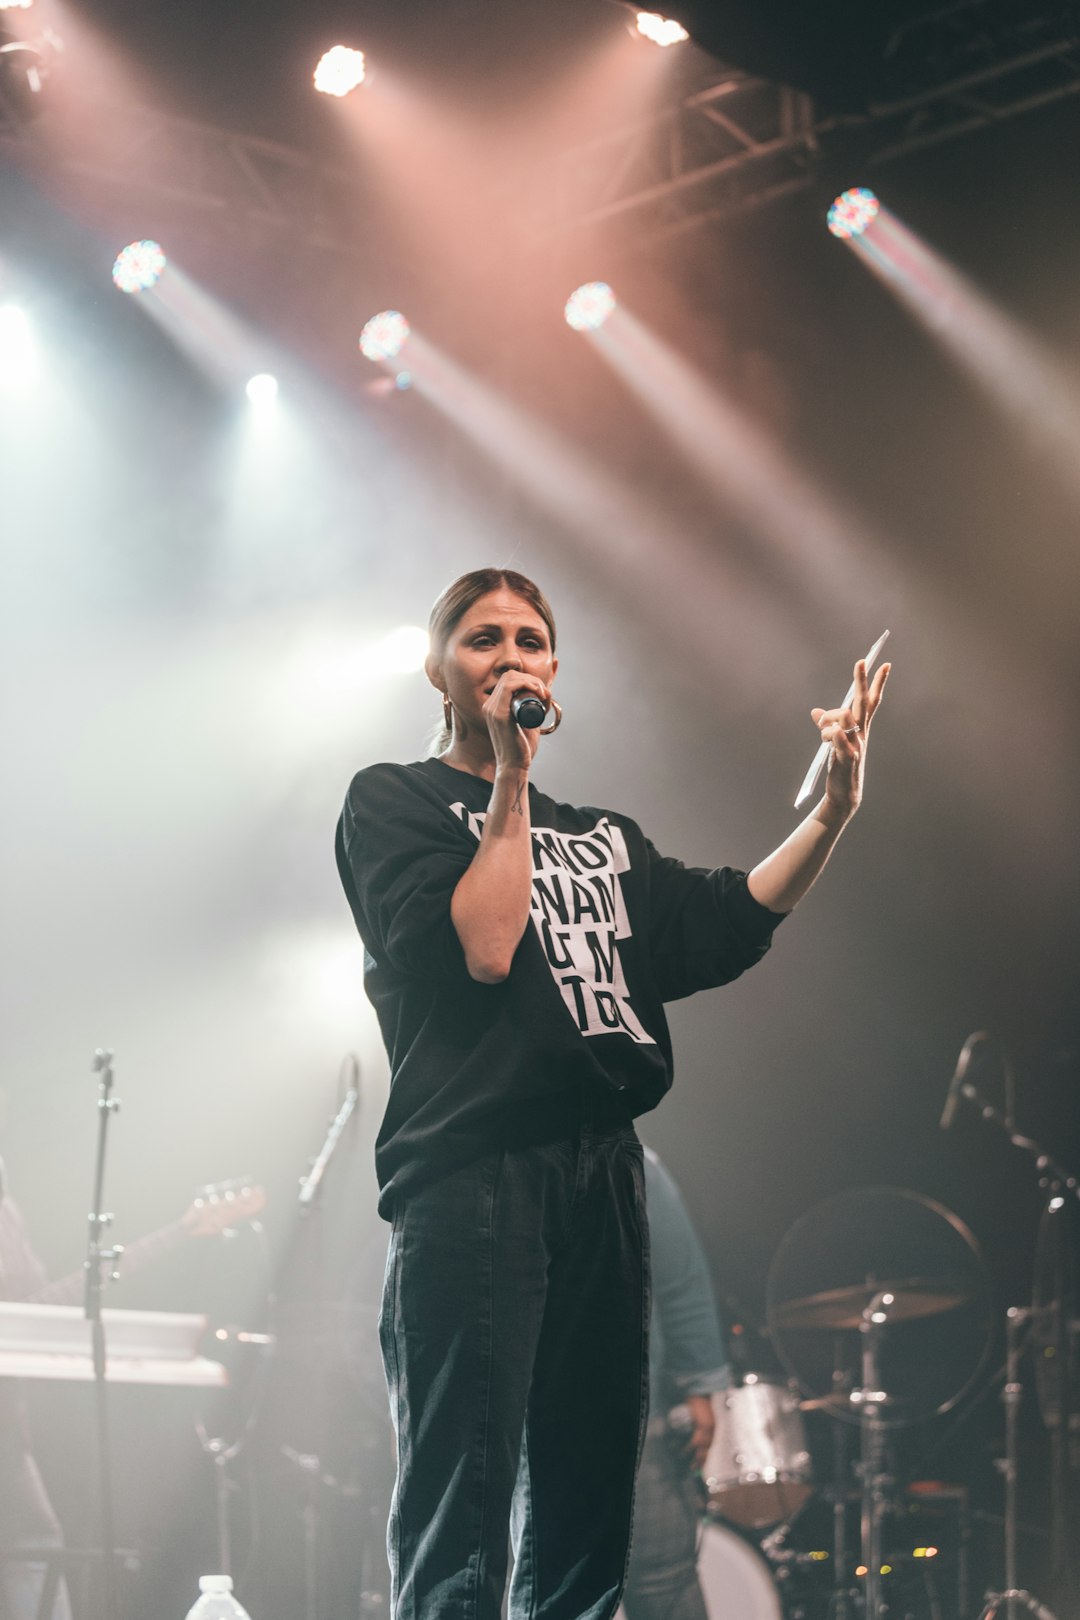 man in black and white crew neck t-shirt singing on stage